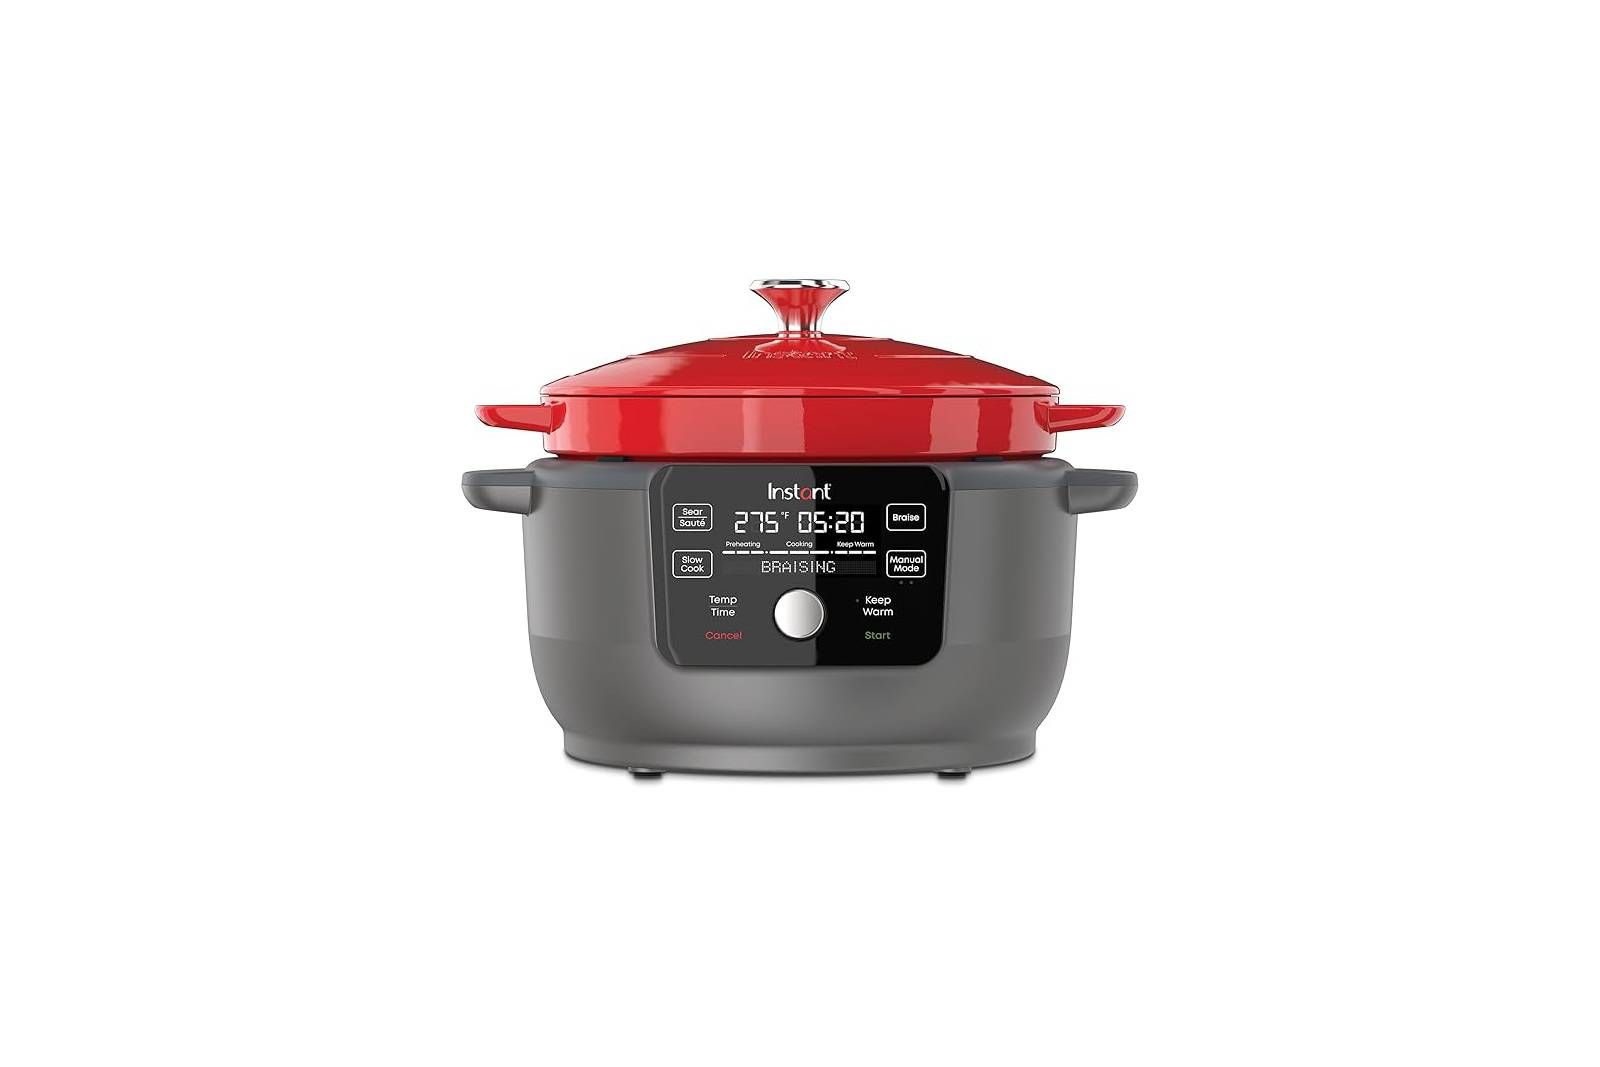 Instant Pot Electric Round Dutch Oven